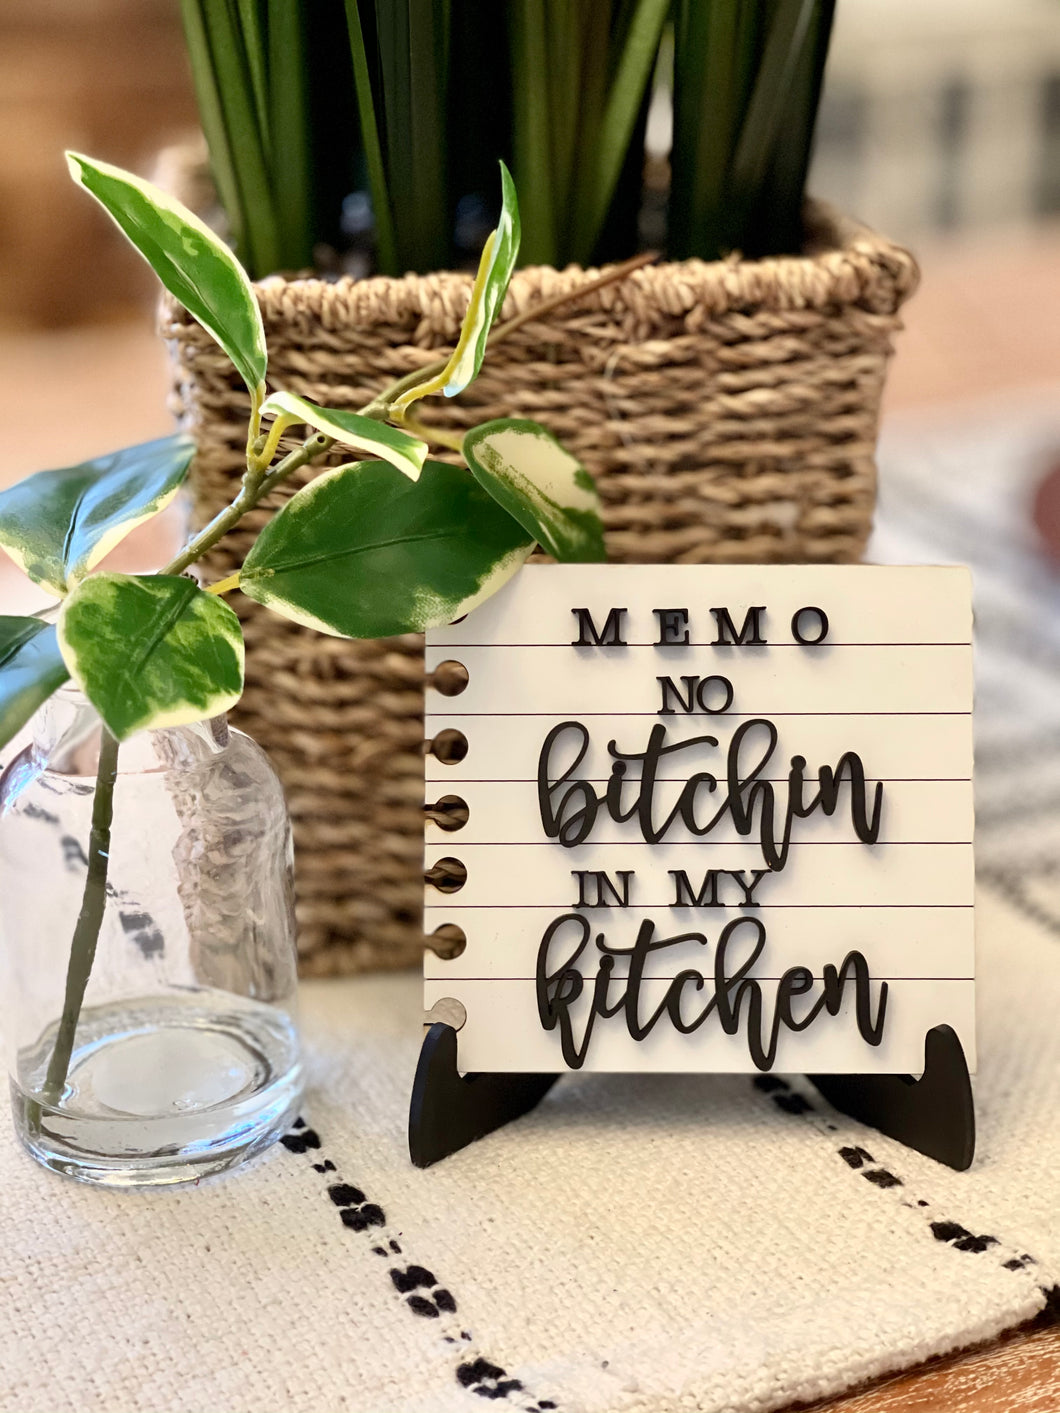 No Bitchin’ in my Kitchen Memo with stand